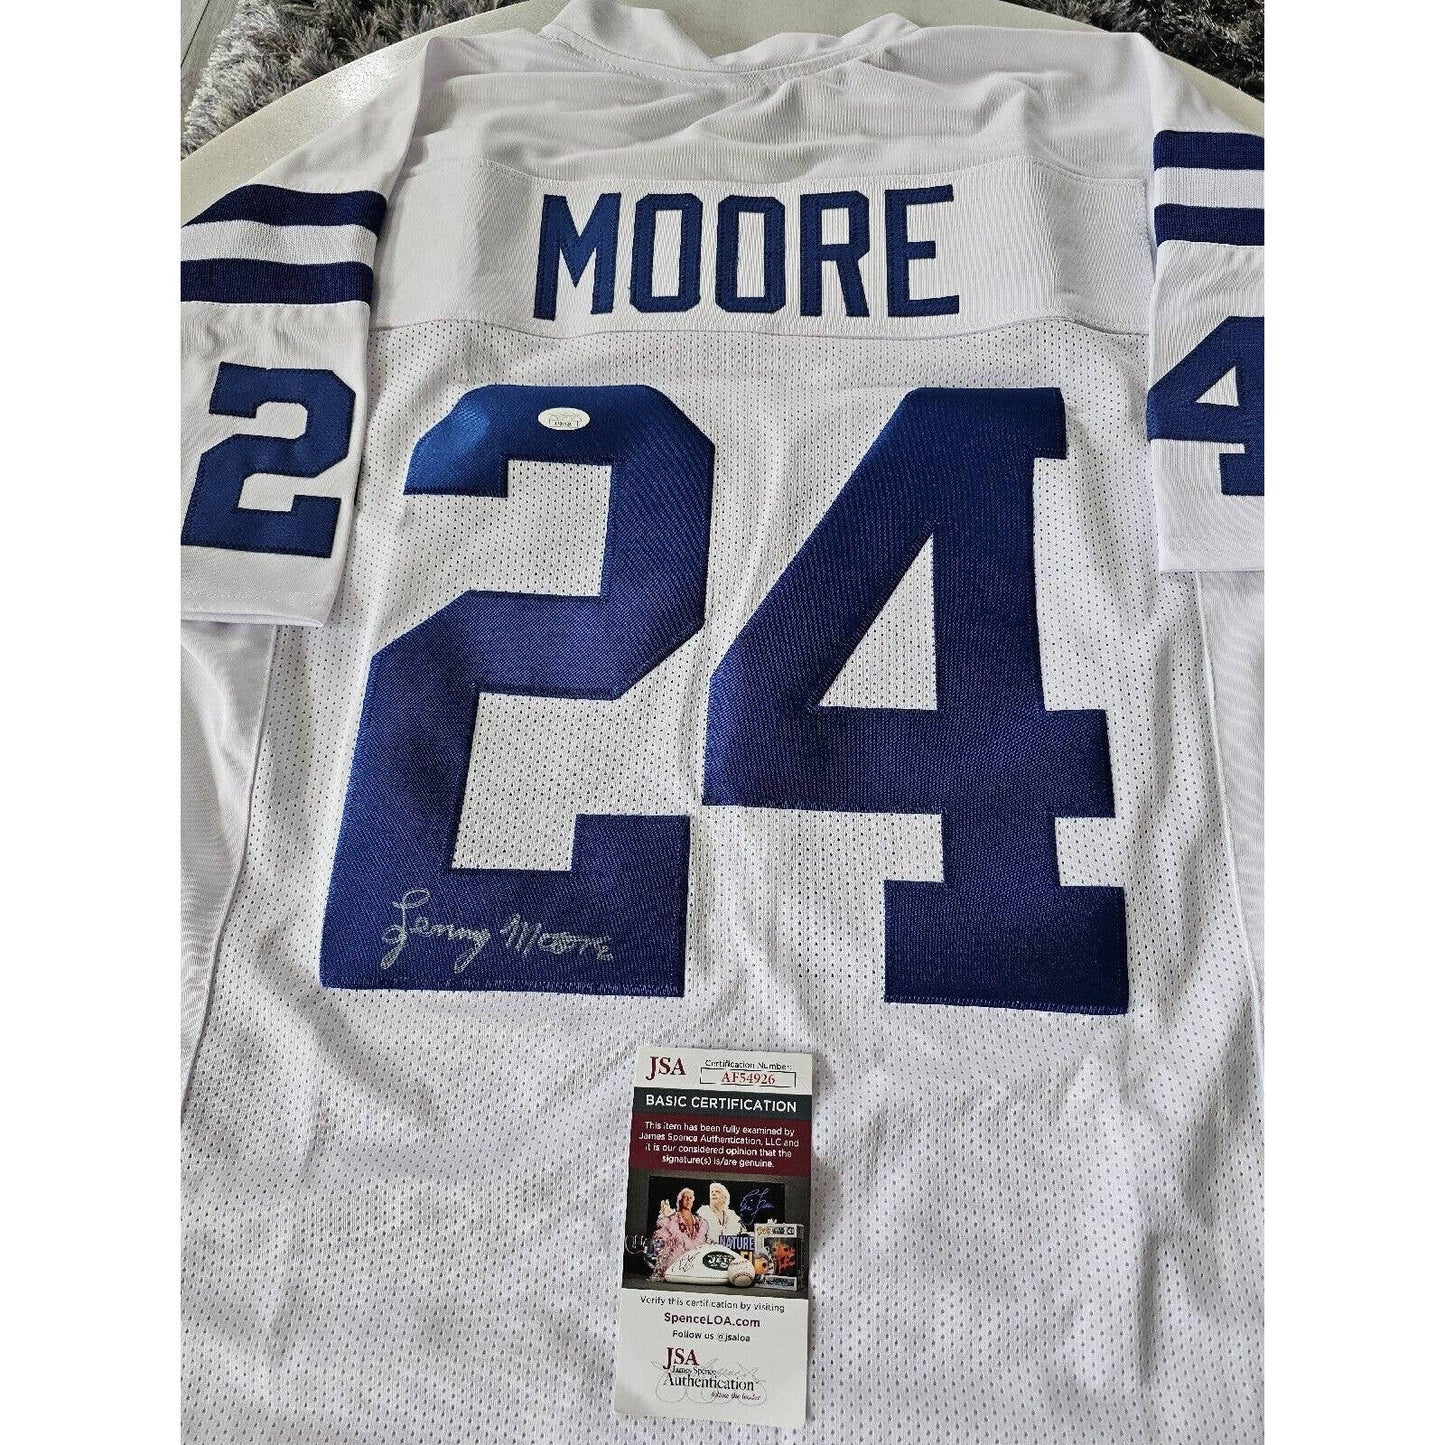 Lenny Moore Autographed/Signed Jersey JSA COA Baltimore Indianapolis Colts HOF